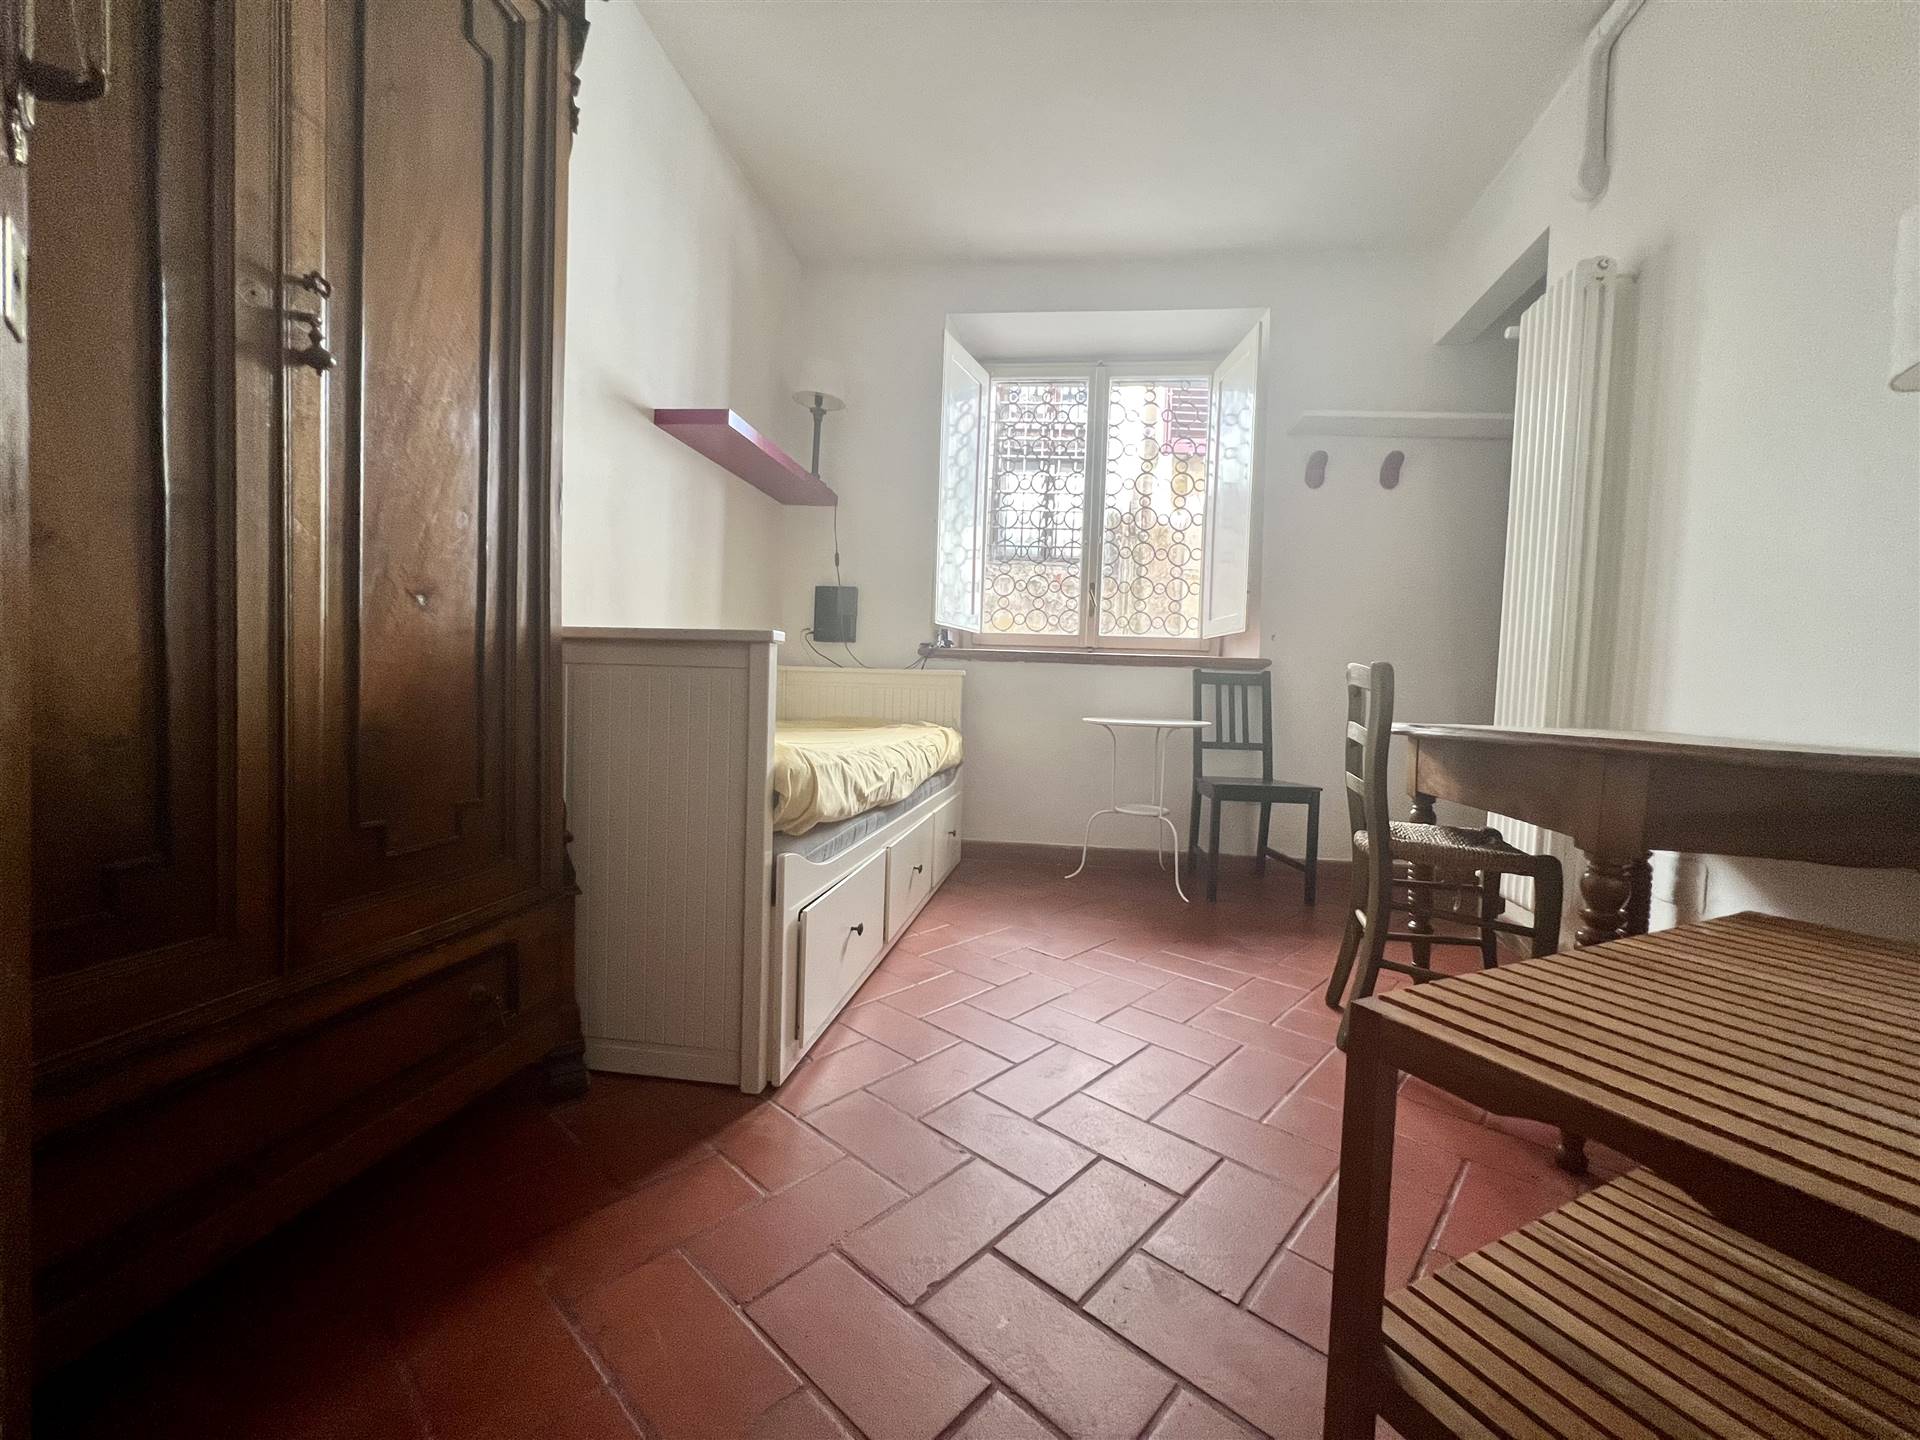 CENTRO STORICO, FIRENZE, Apartment for sale of 35 Sq. mt., Good condition, Heating Individual heating system, Energetic class: G, Epi: 100 kwh/m2 